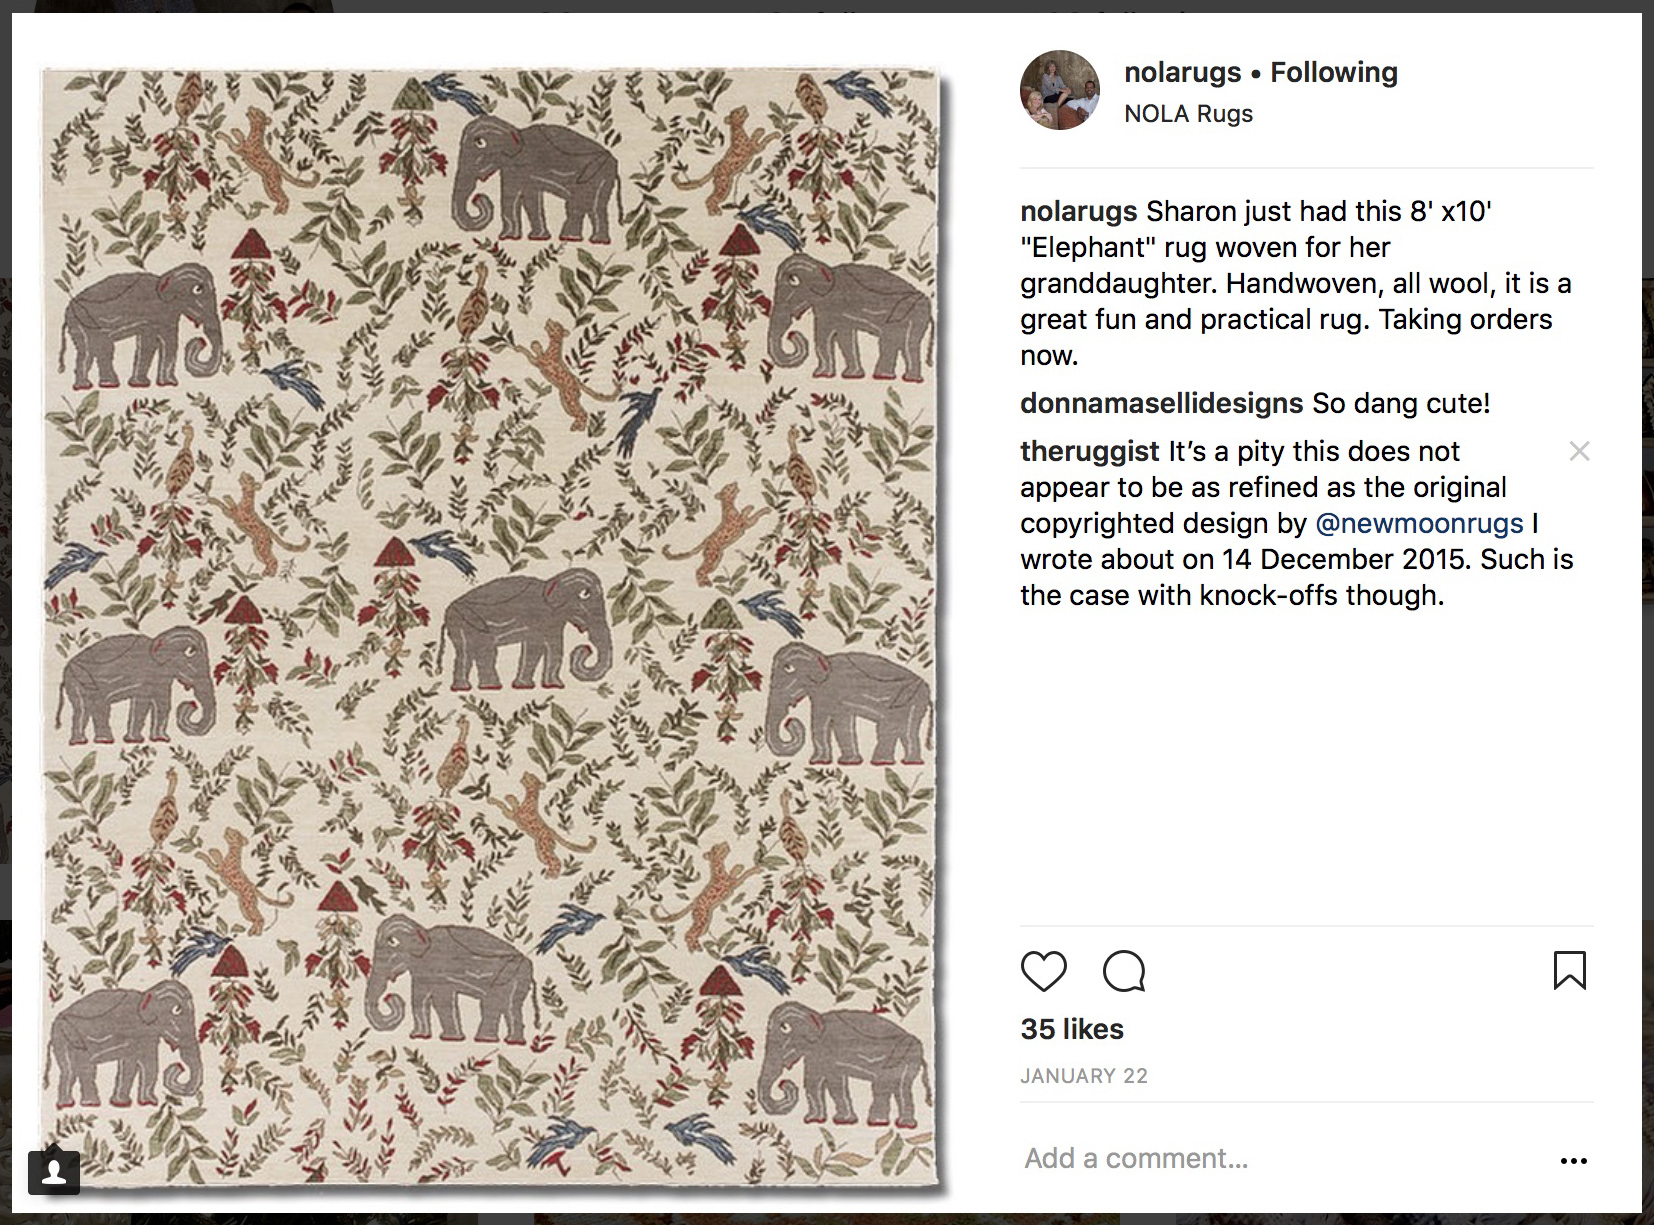 Screen-capture of an Instagram post by Nola Rugs of New Orleans, Louisiana depicting a knockoff of "Menagerie' by New Moon.' | Screen-capture by The Ruggist on 31 January 2018.